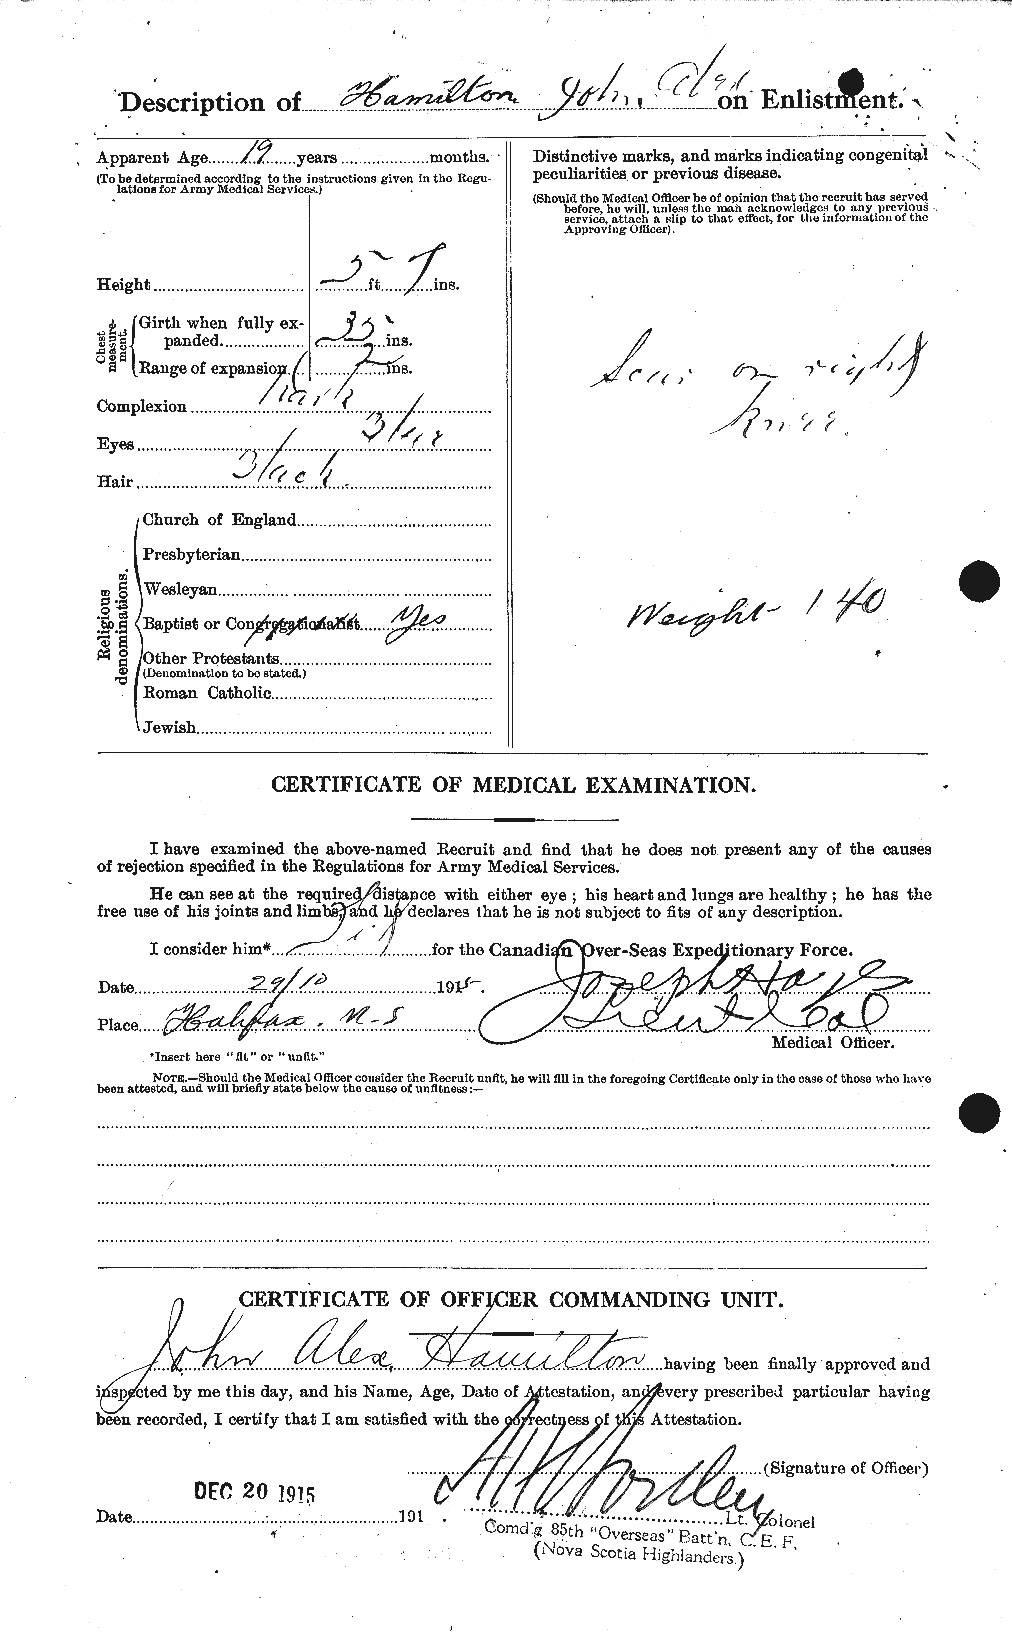 Personnel Records of the First World War - CEF 373063b